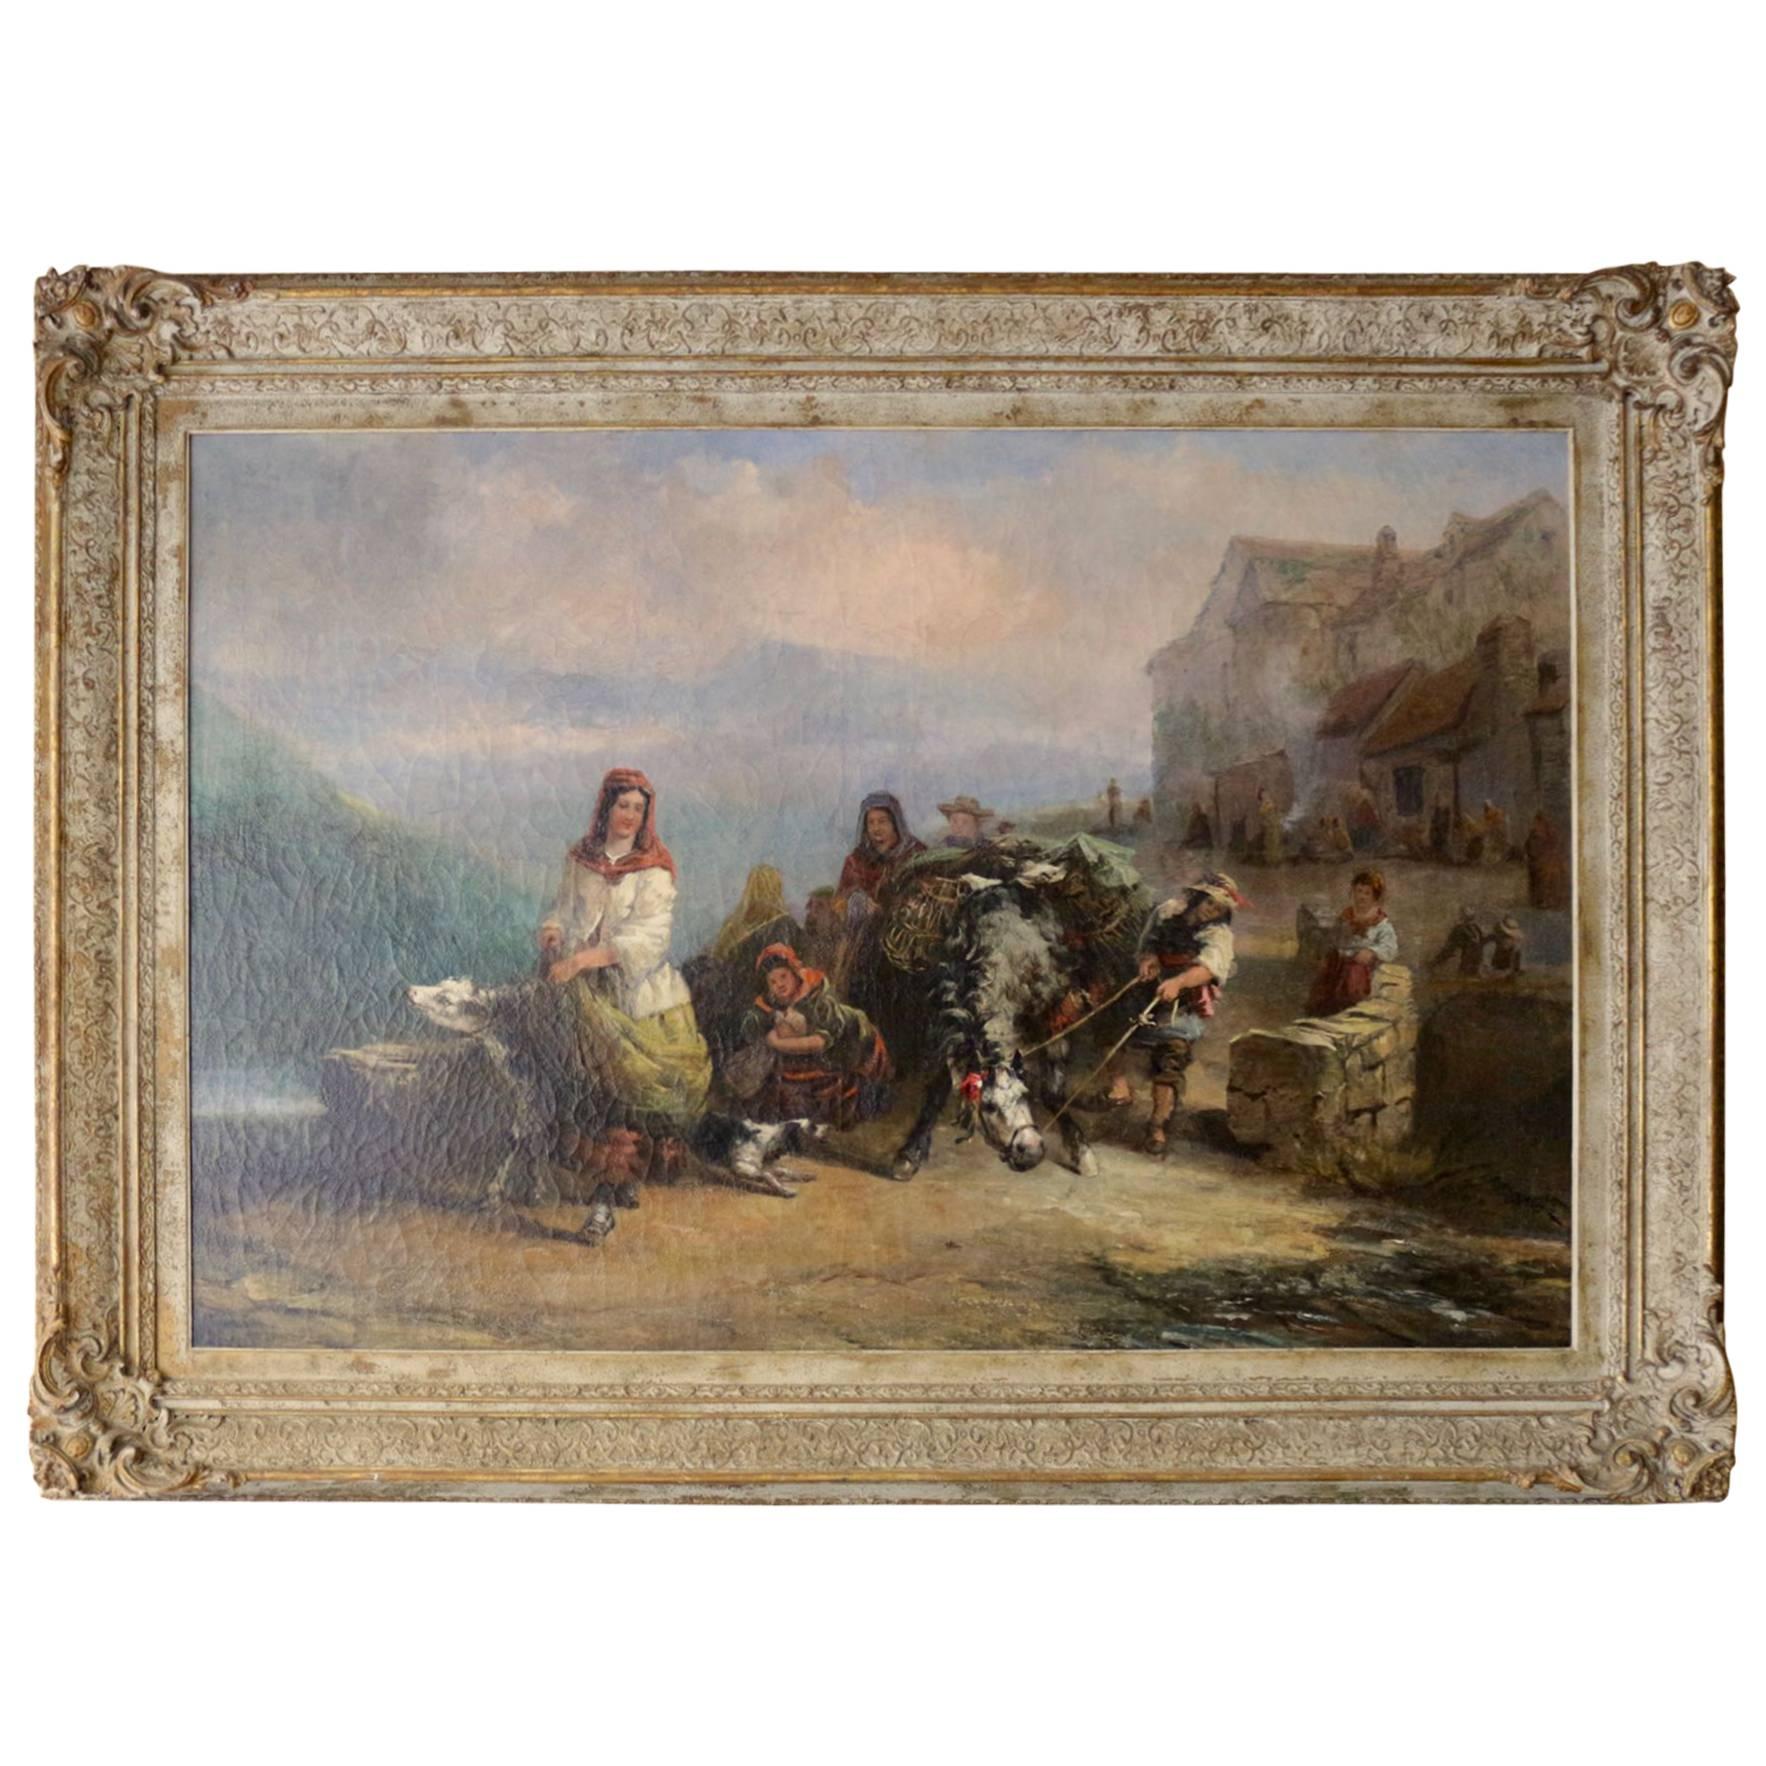 Very Large 19th Century Oil on Canvas "Farmer Family Leaving Their Village" For Sale